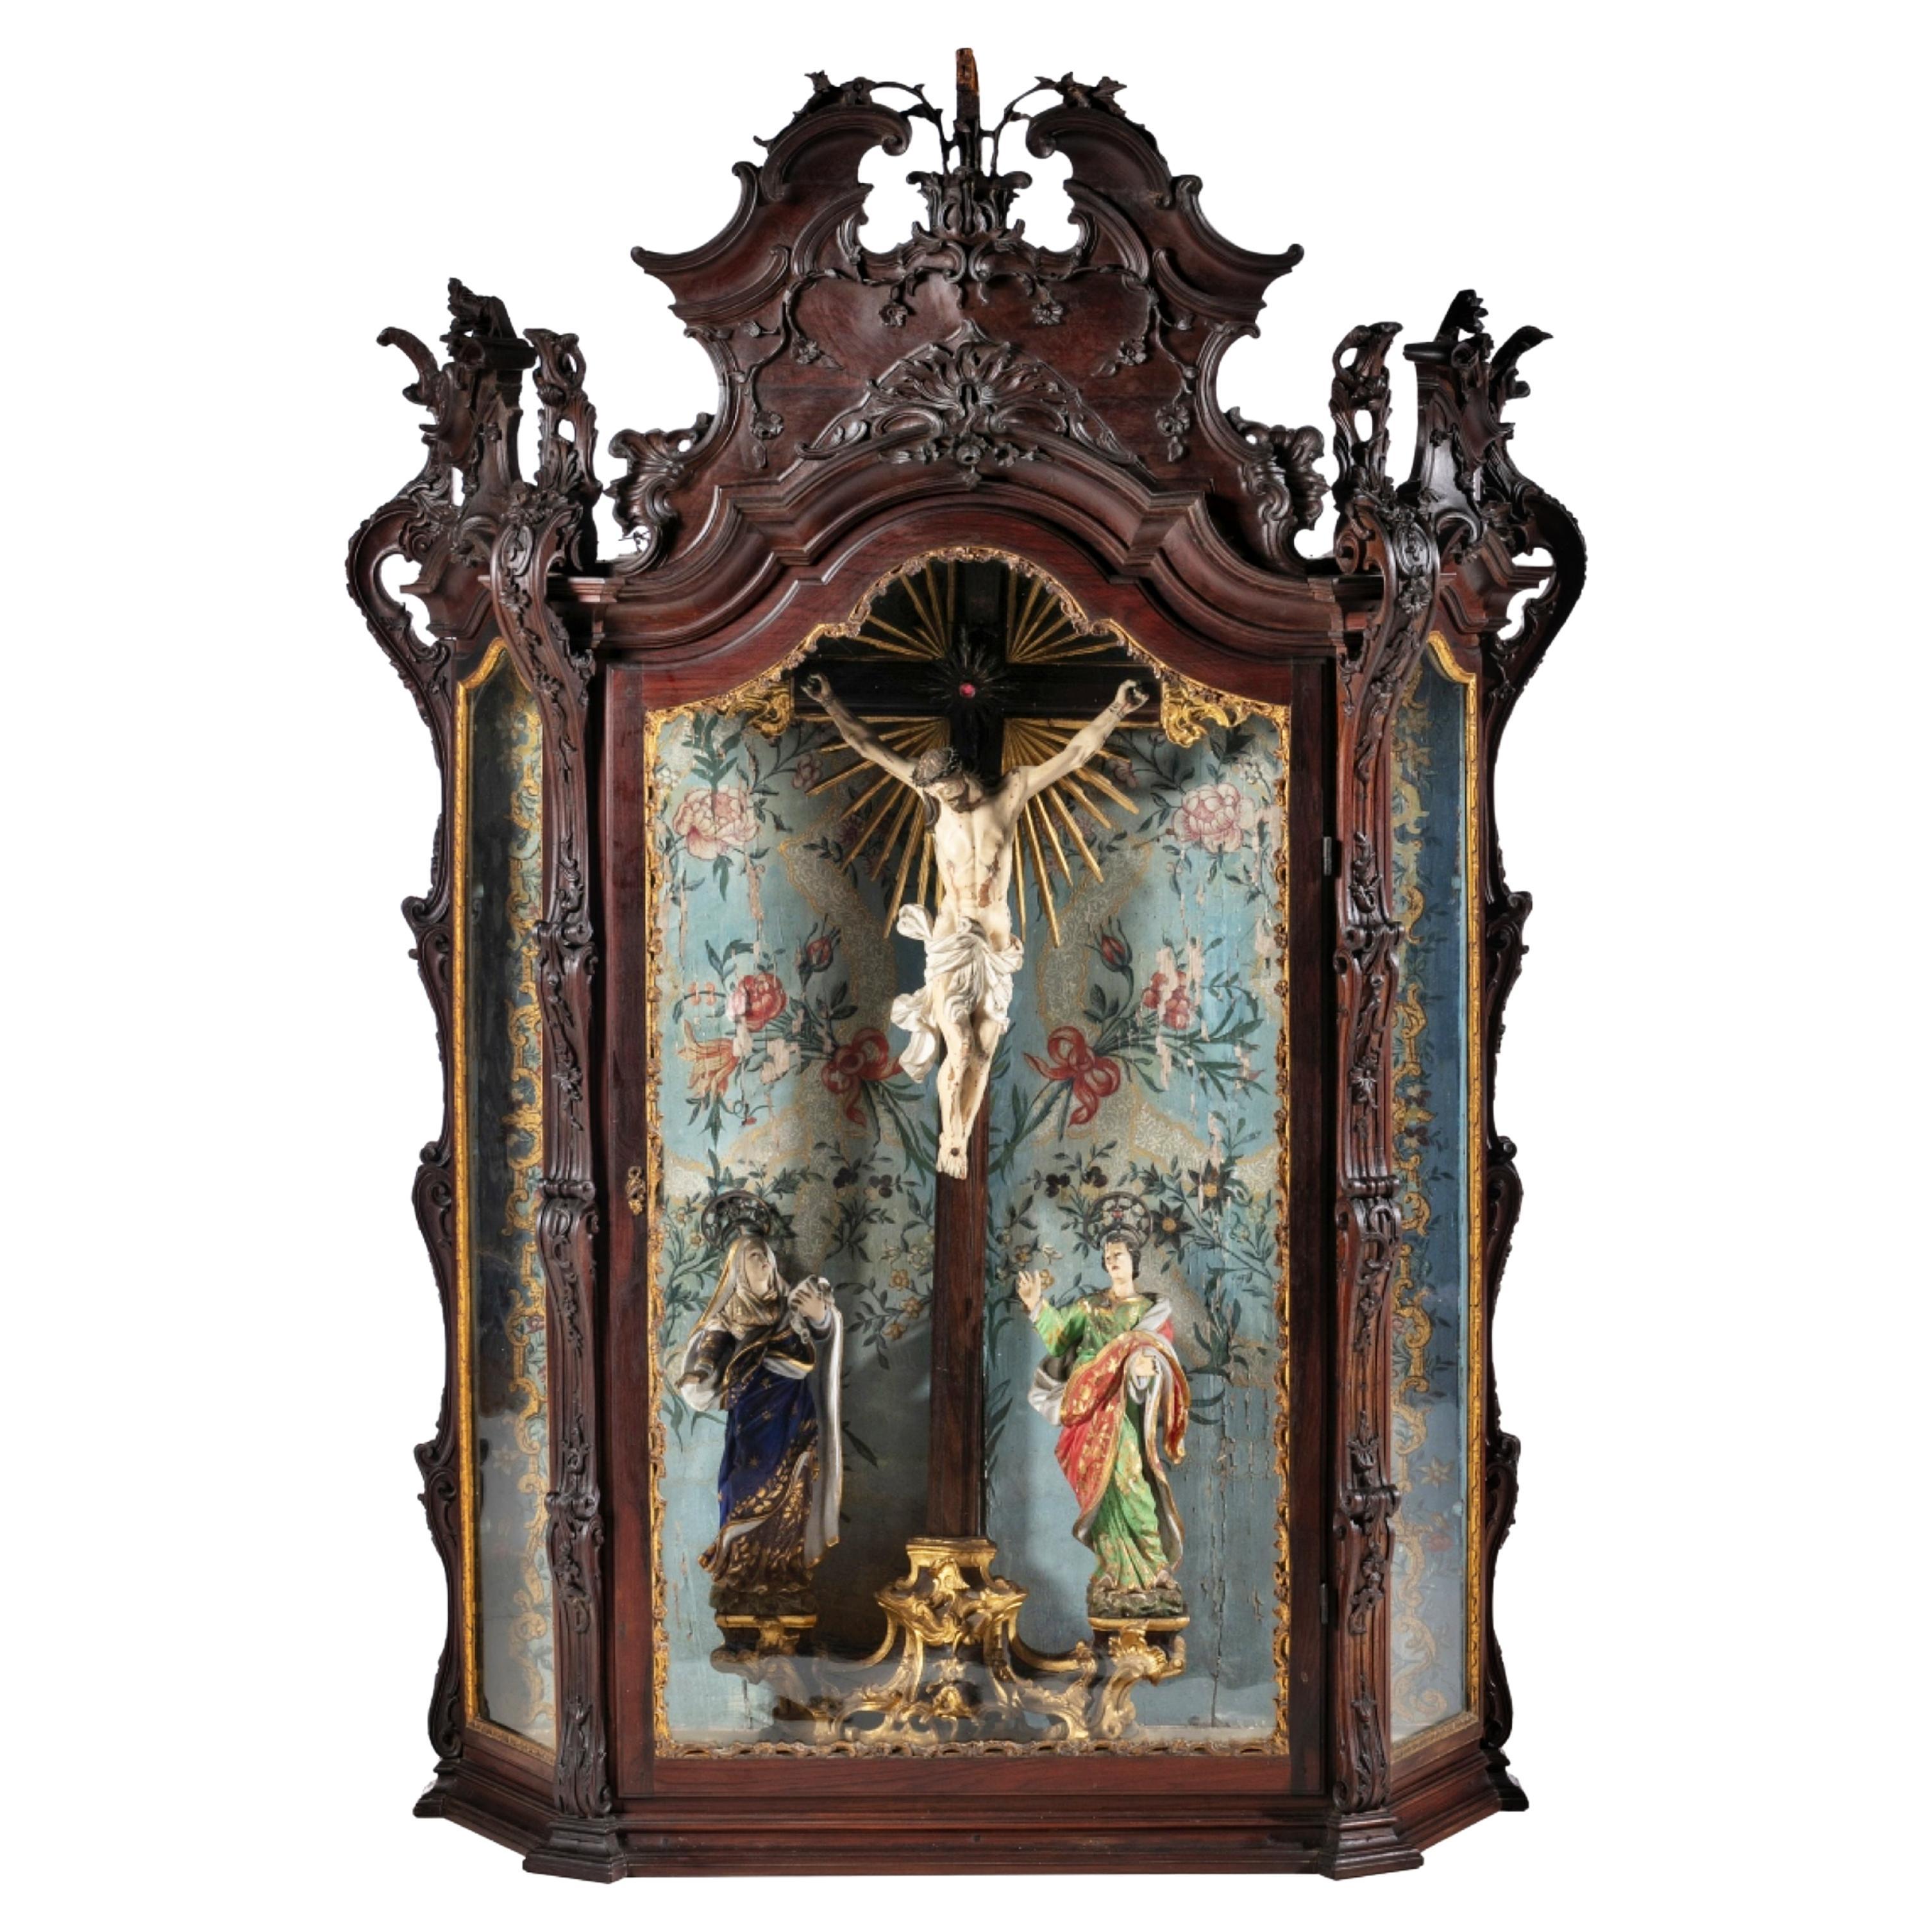 IMPORTANT PORTUGUESE ORATORY WITH CALVARY 18th Century For Sale